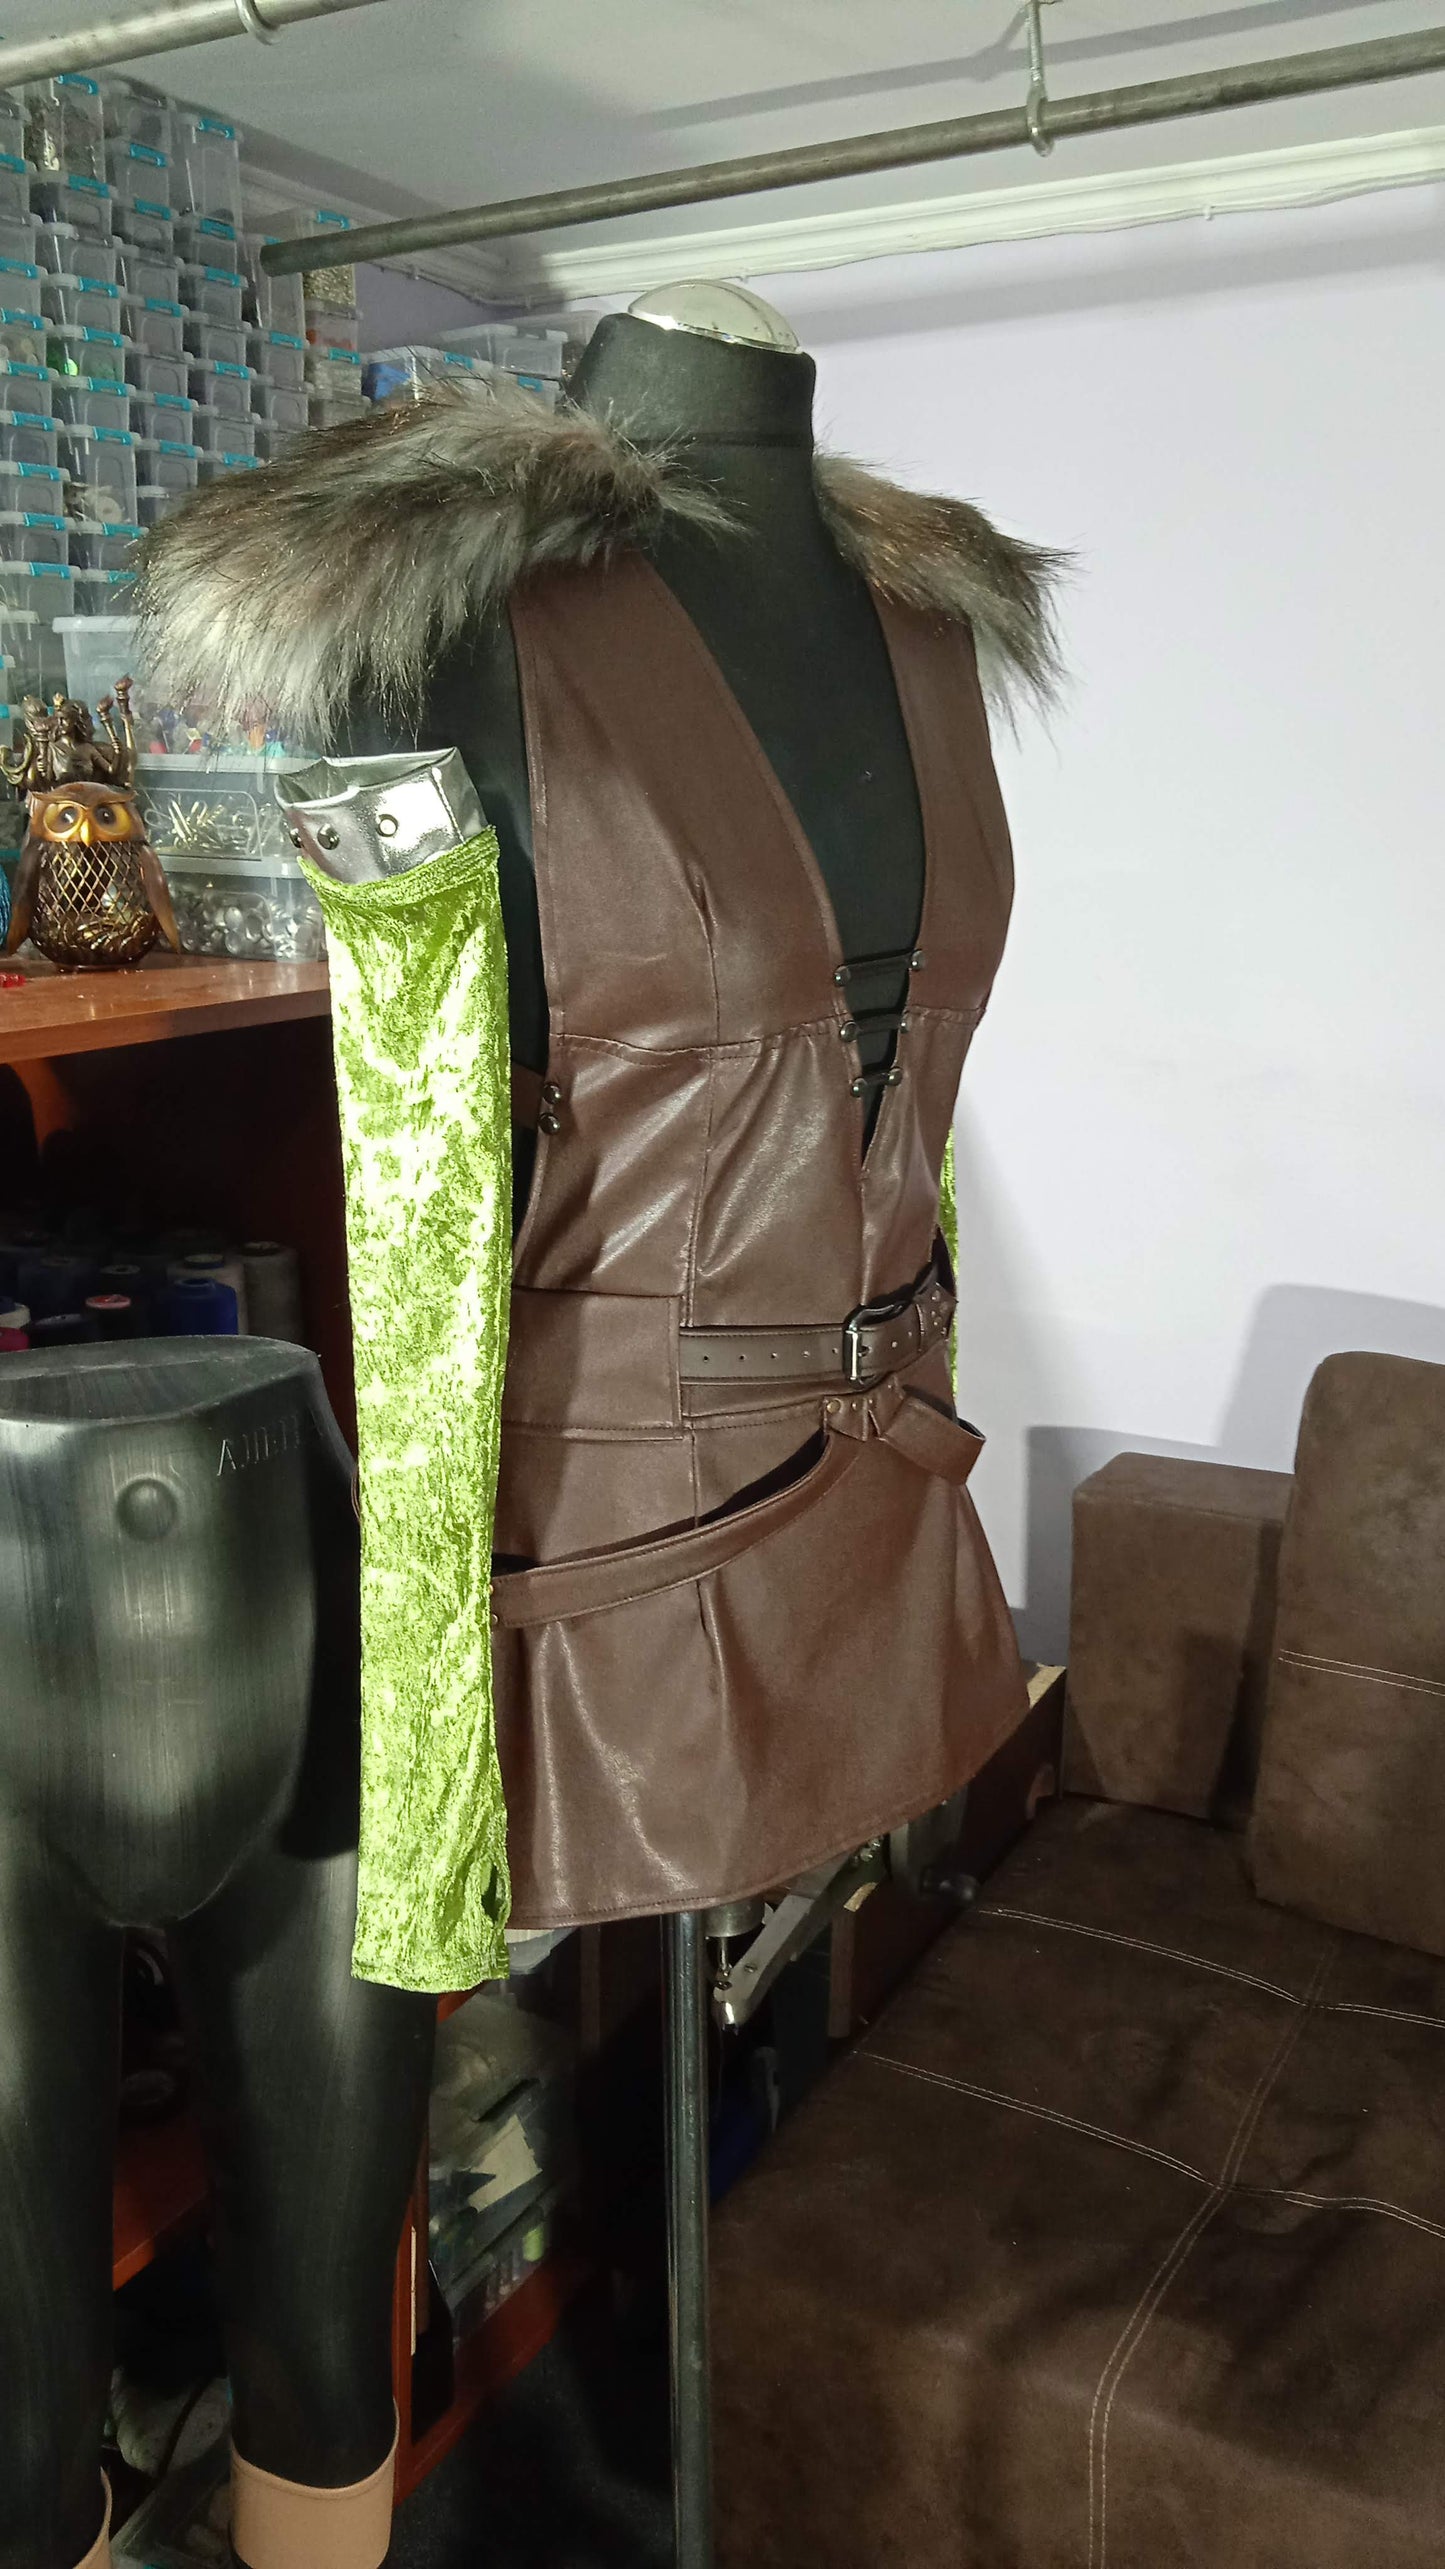 Aela the Huntress / Skyrim game cosplay outfit